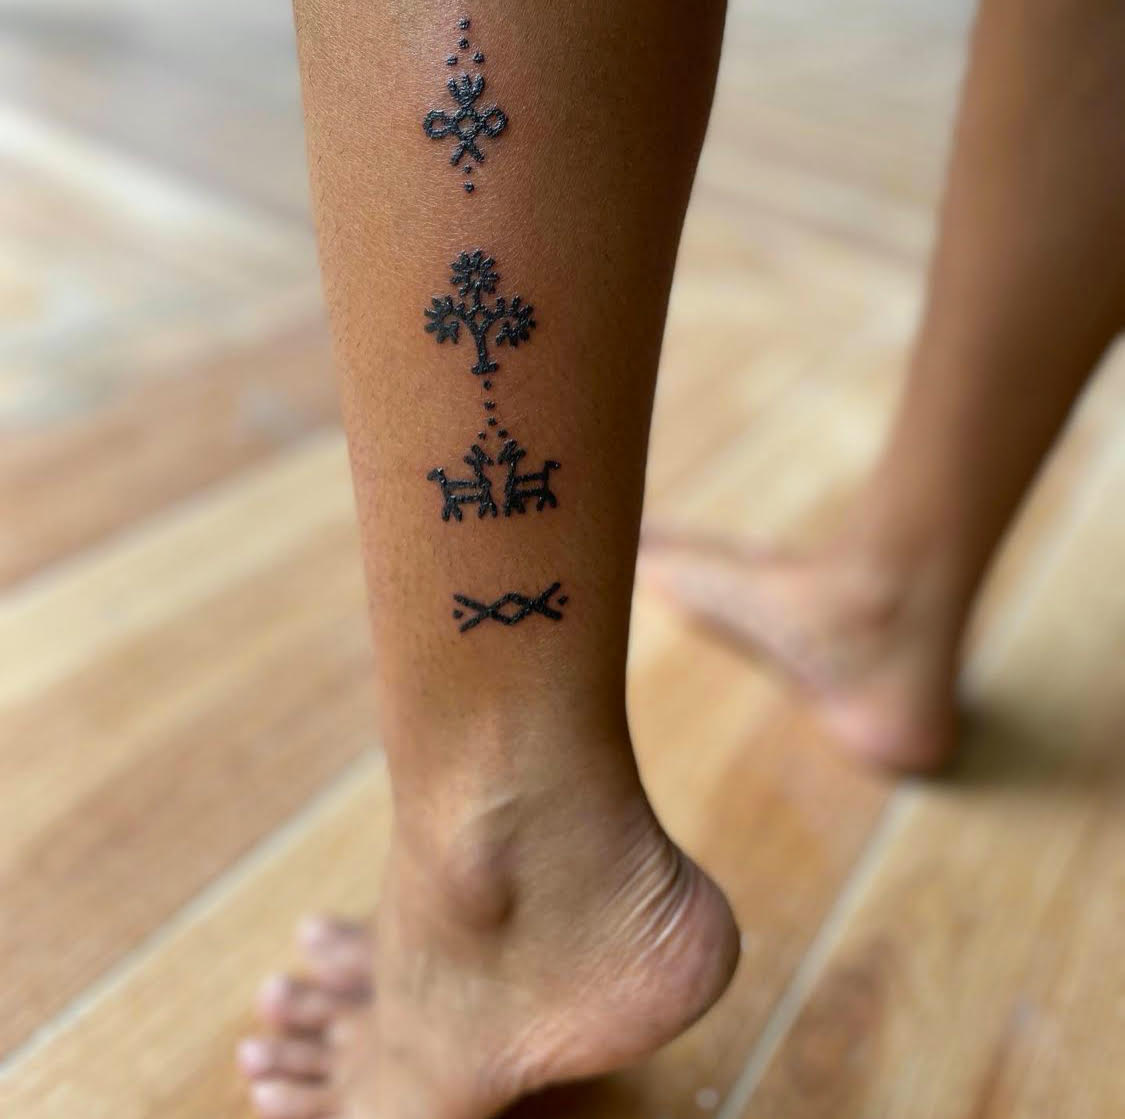 In Polynesia, tattoos are more than skin deep